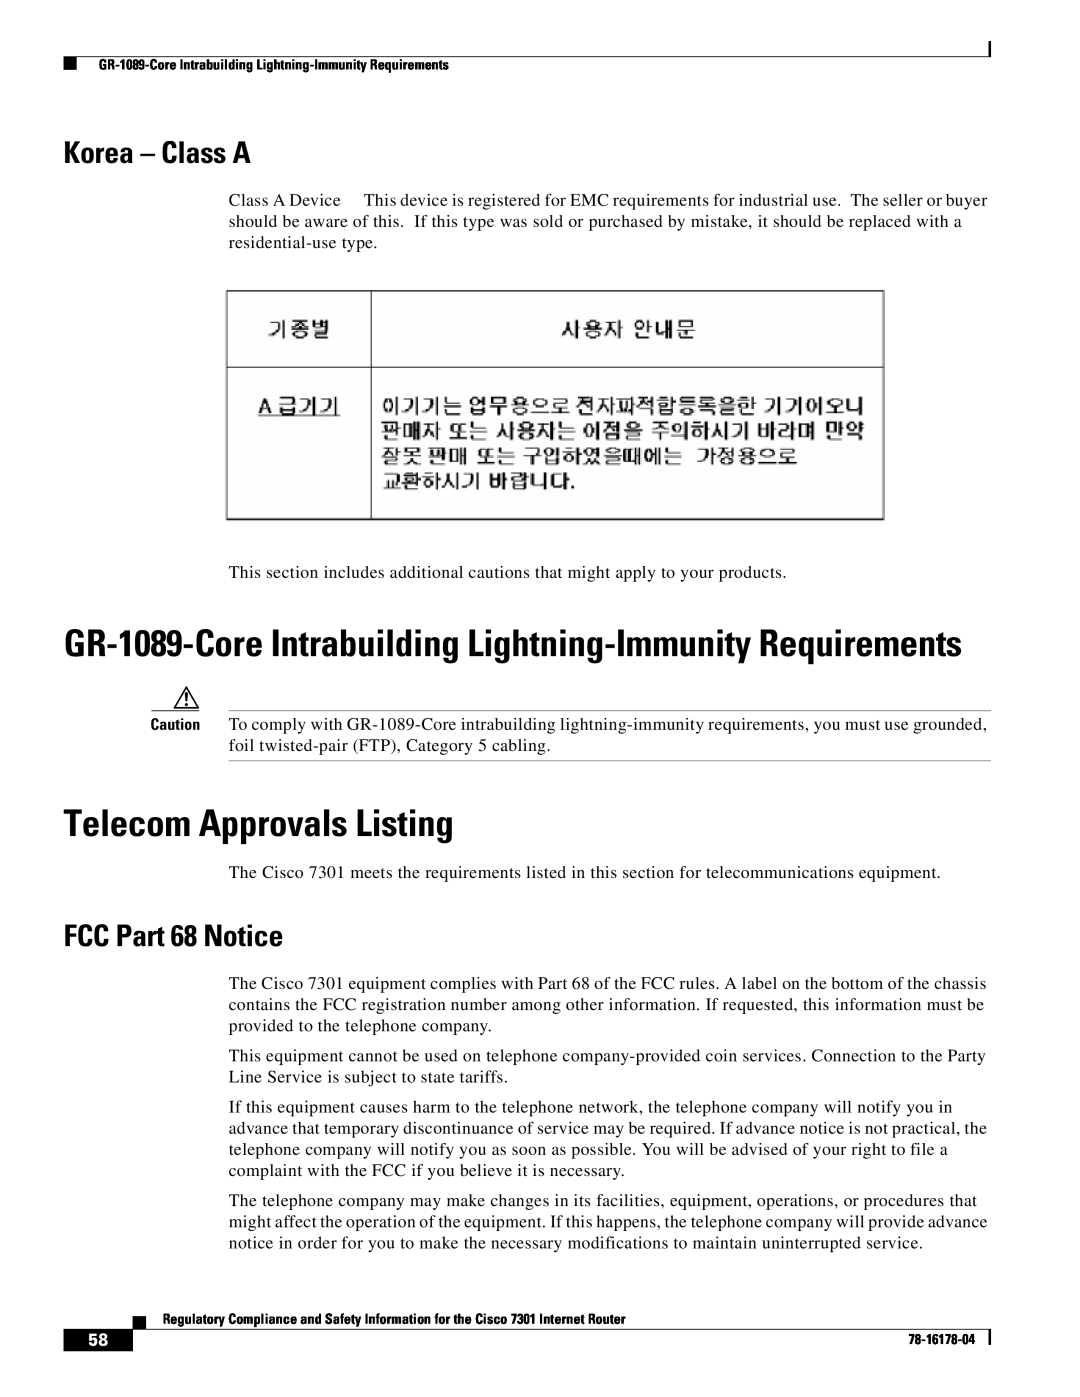 Cisco Systems CISCO7301 manual Telecom Approvals Listing, GR-1089-Core Intrabuilding Lightning-Immunity Requirements 